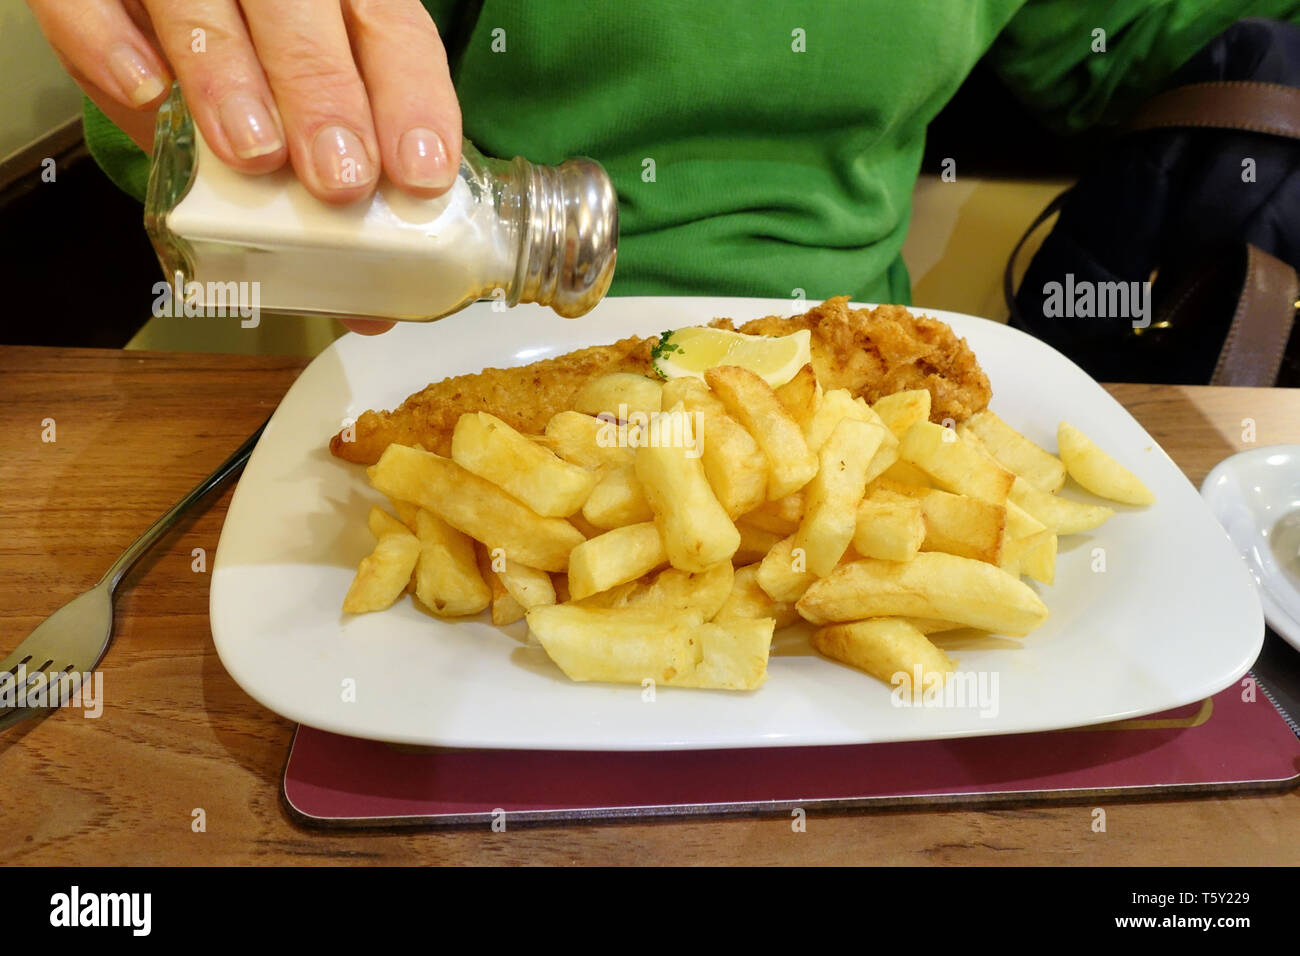 A traditional English Fish and Chip meal served up on a table in a Fish and Chip restaurant. The plates contains fresh battered Cod, chips and tea Stock Photo